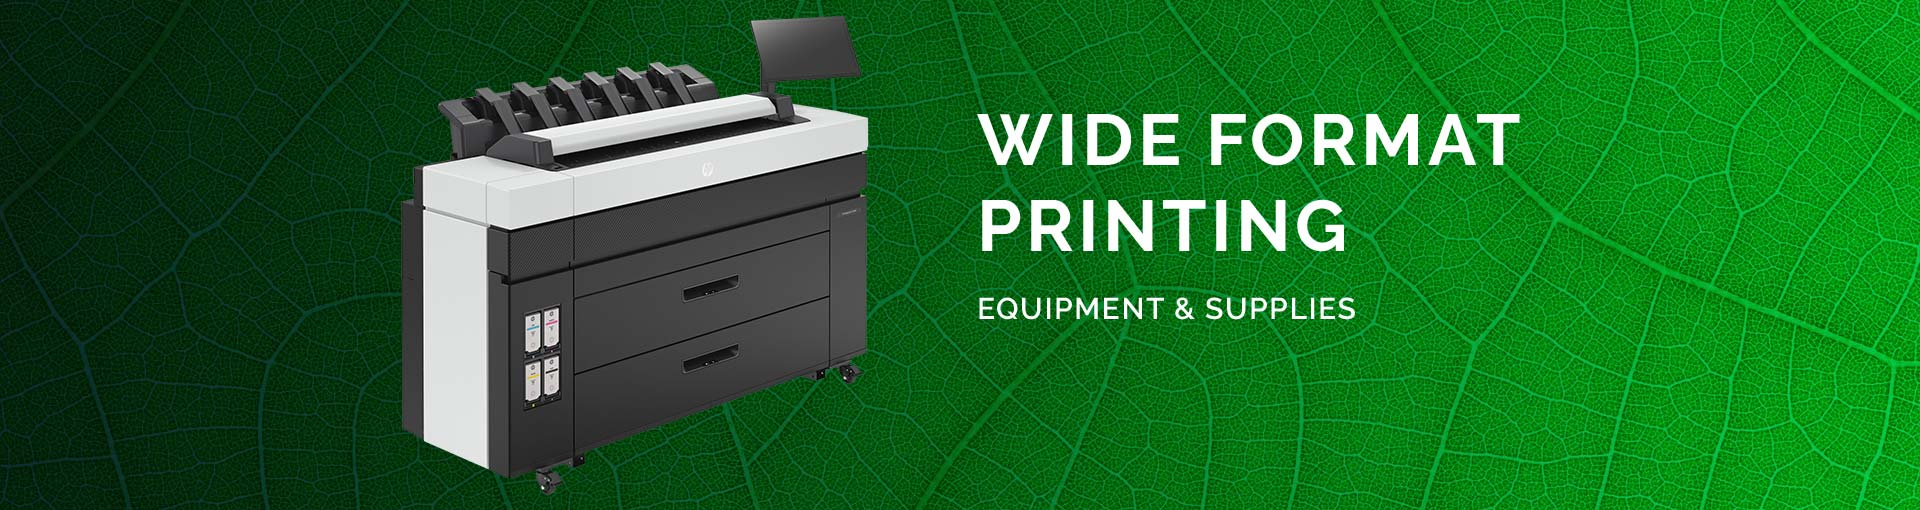 wide format printing equipment and supplies